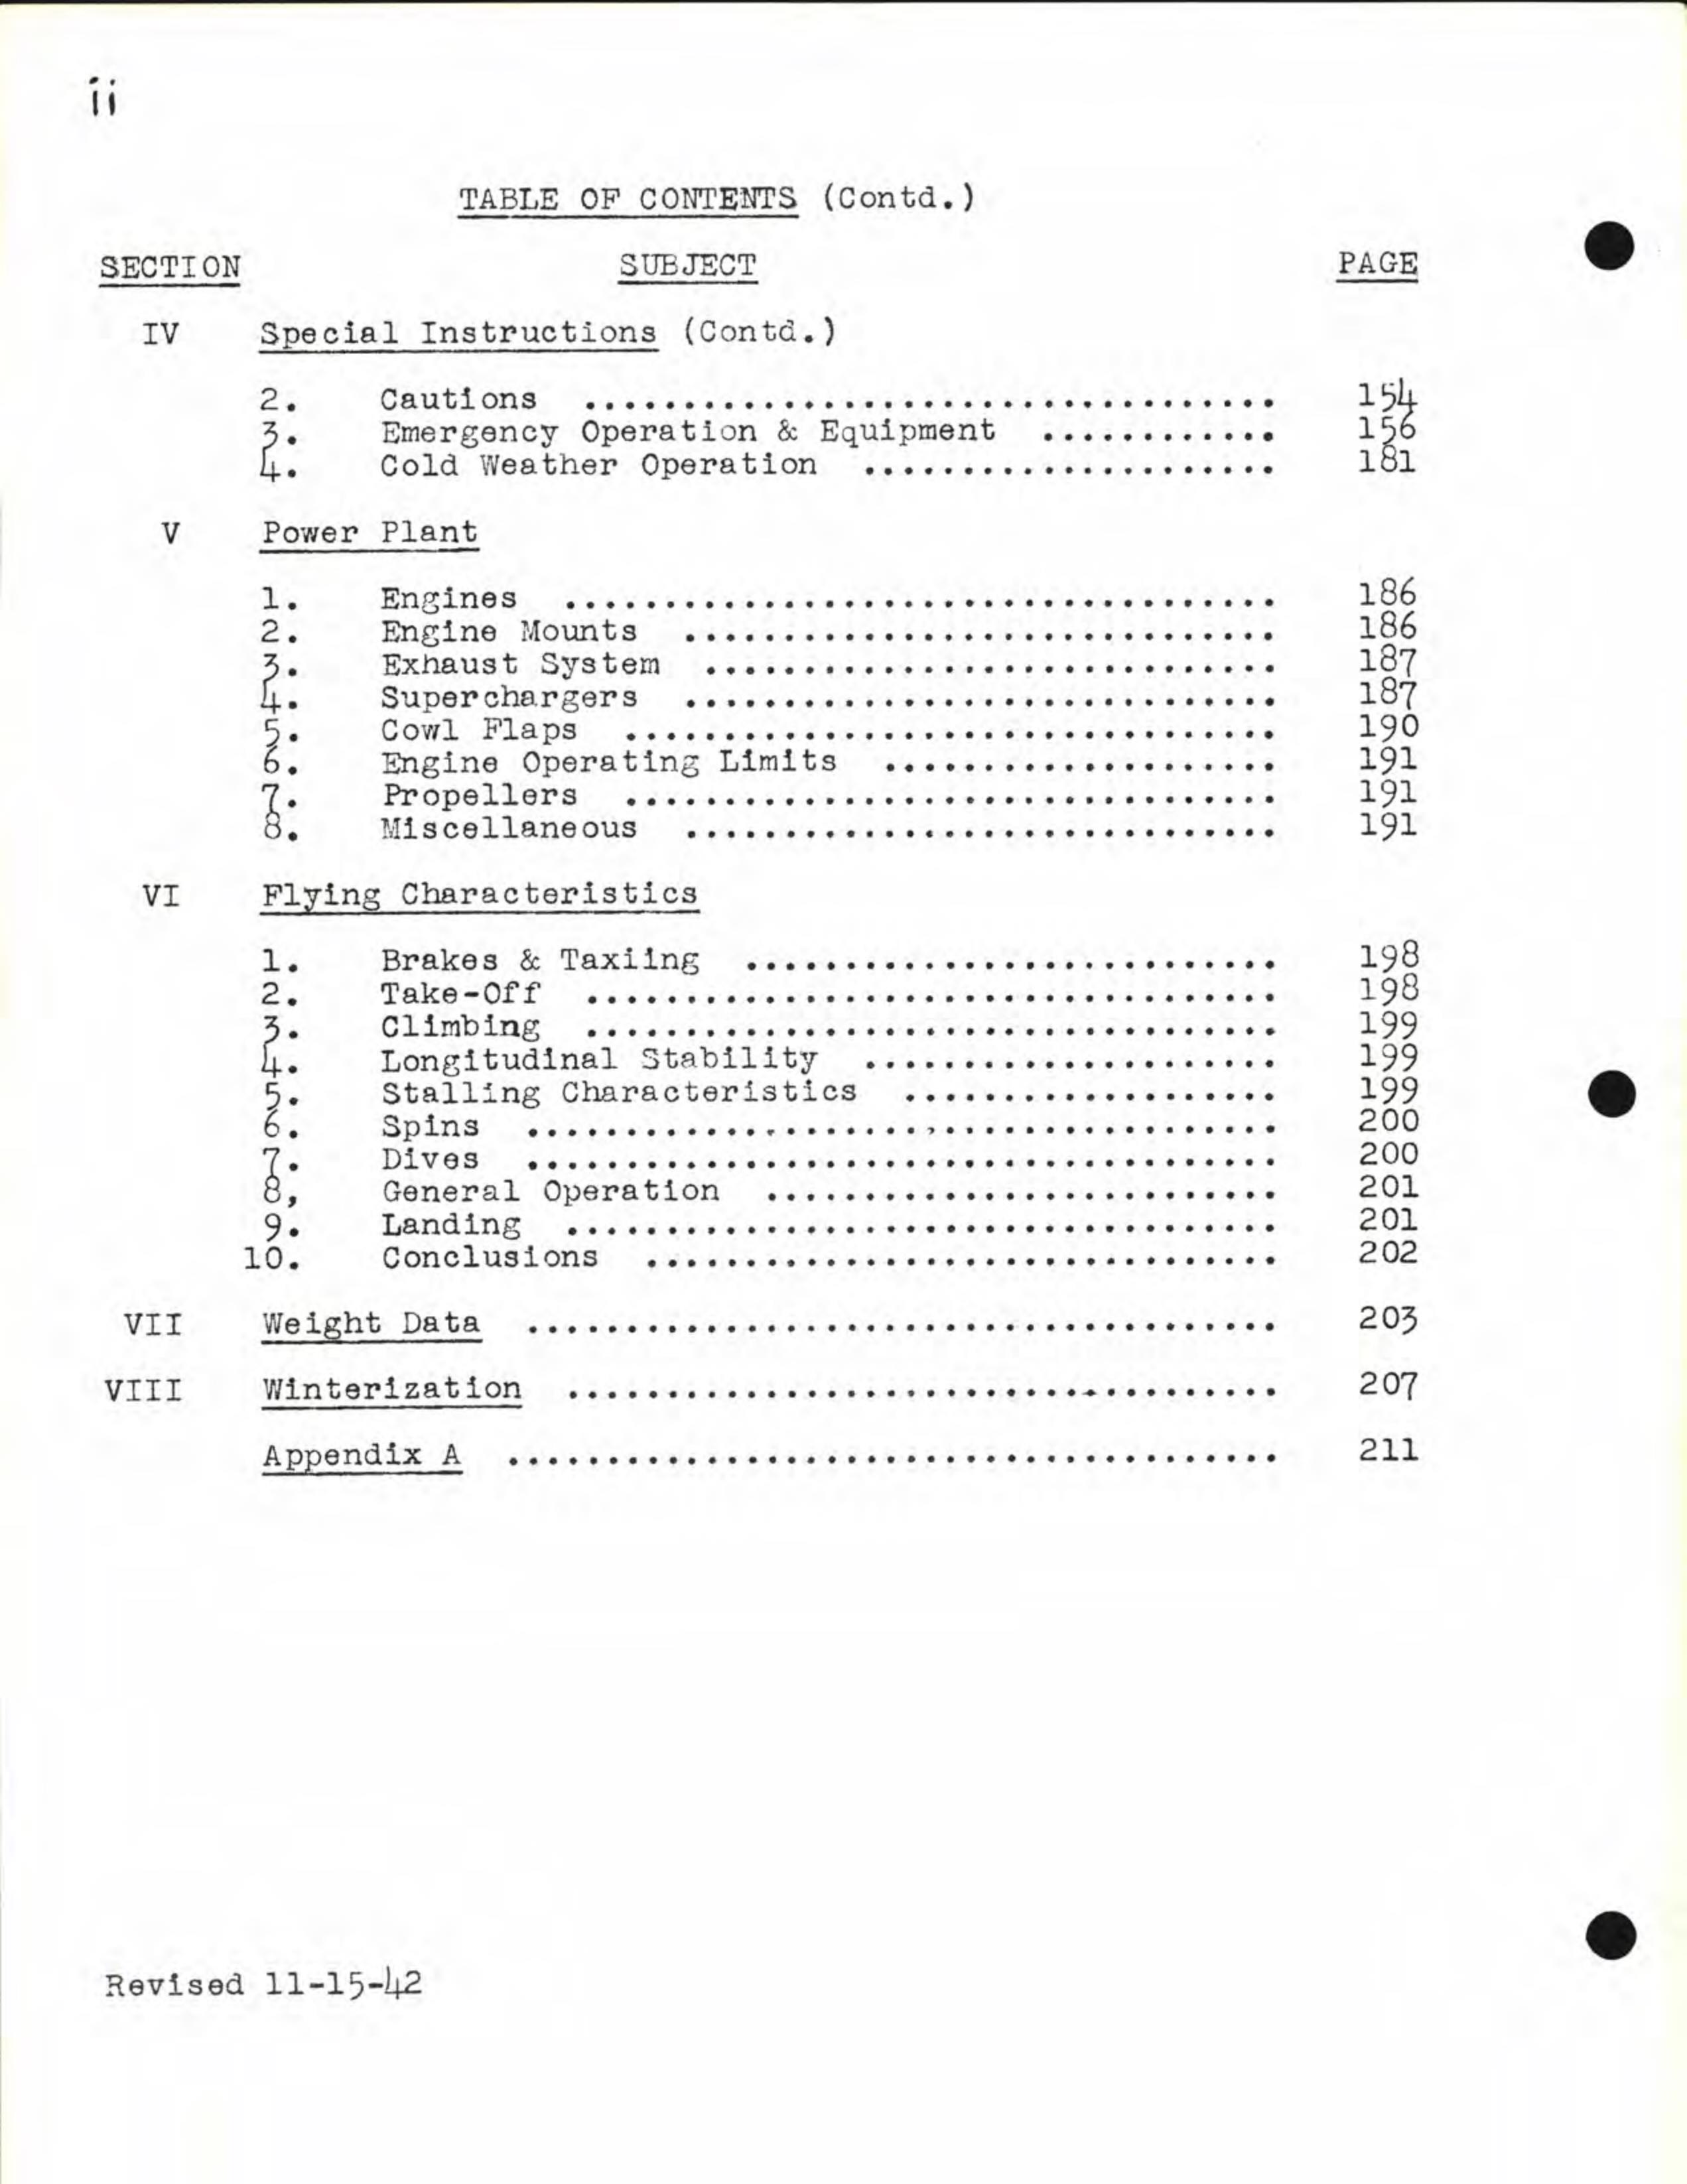 Sample page 6 from AirCorps Library document: Preliminary Handbook of Instructions for the B-24C, D, and E